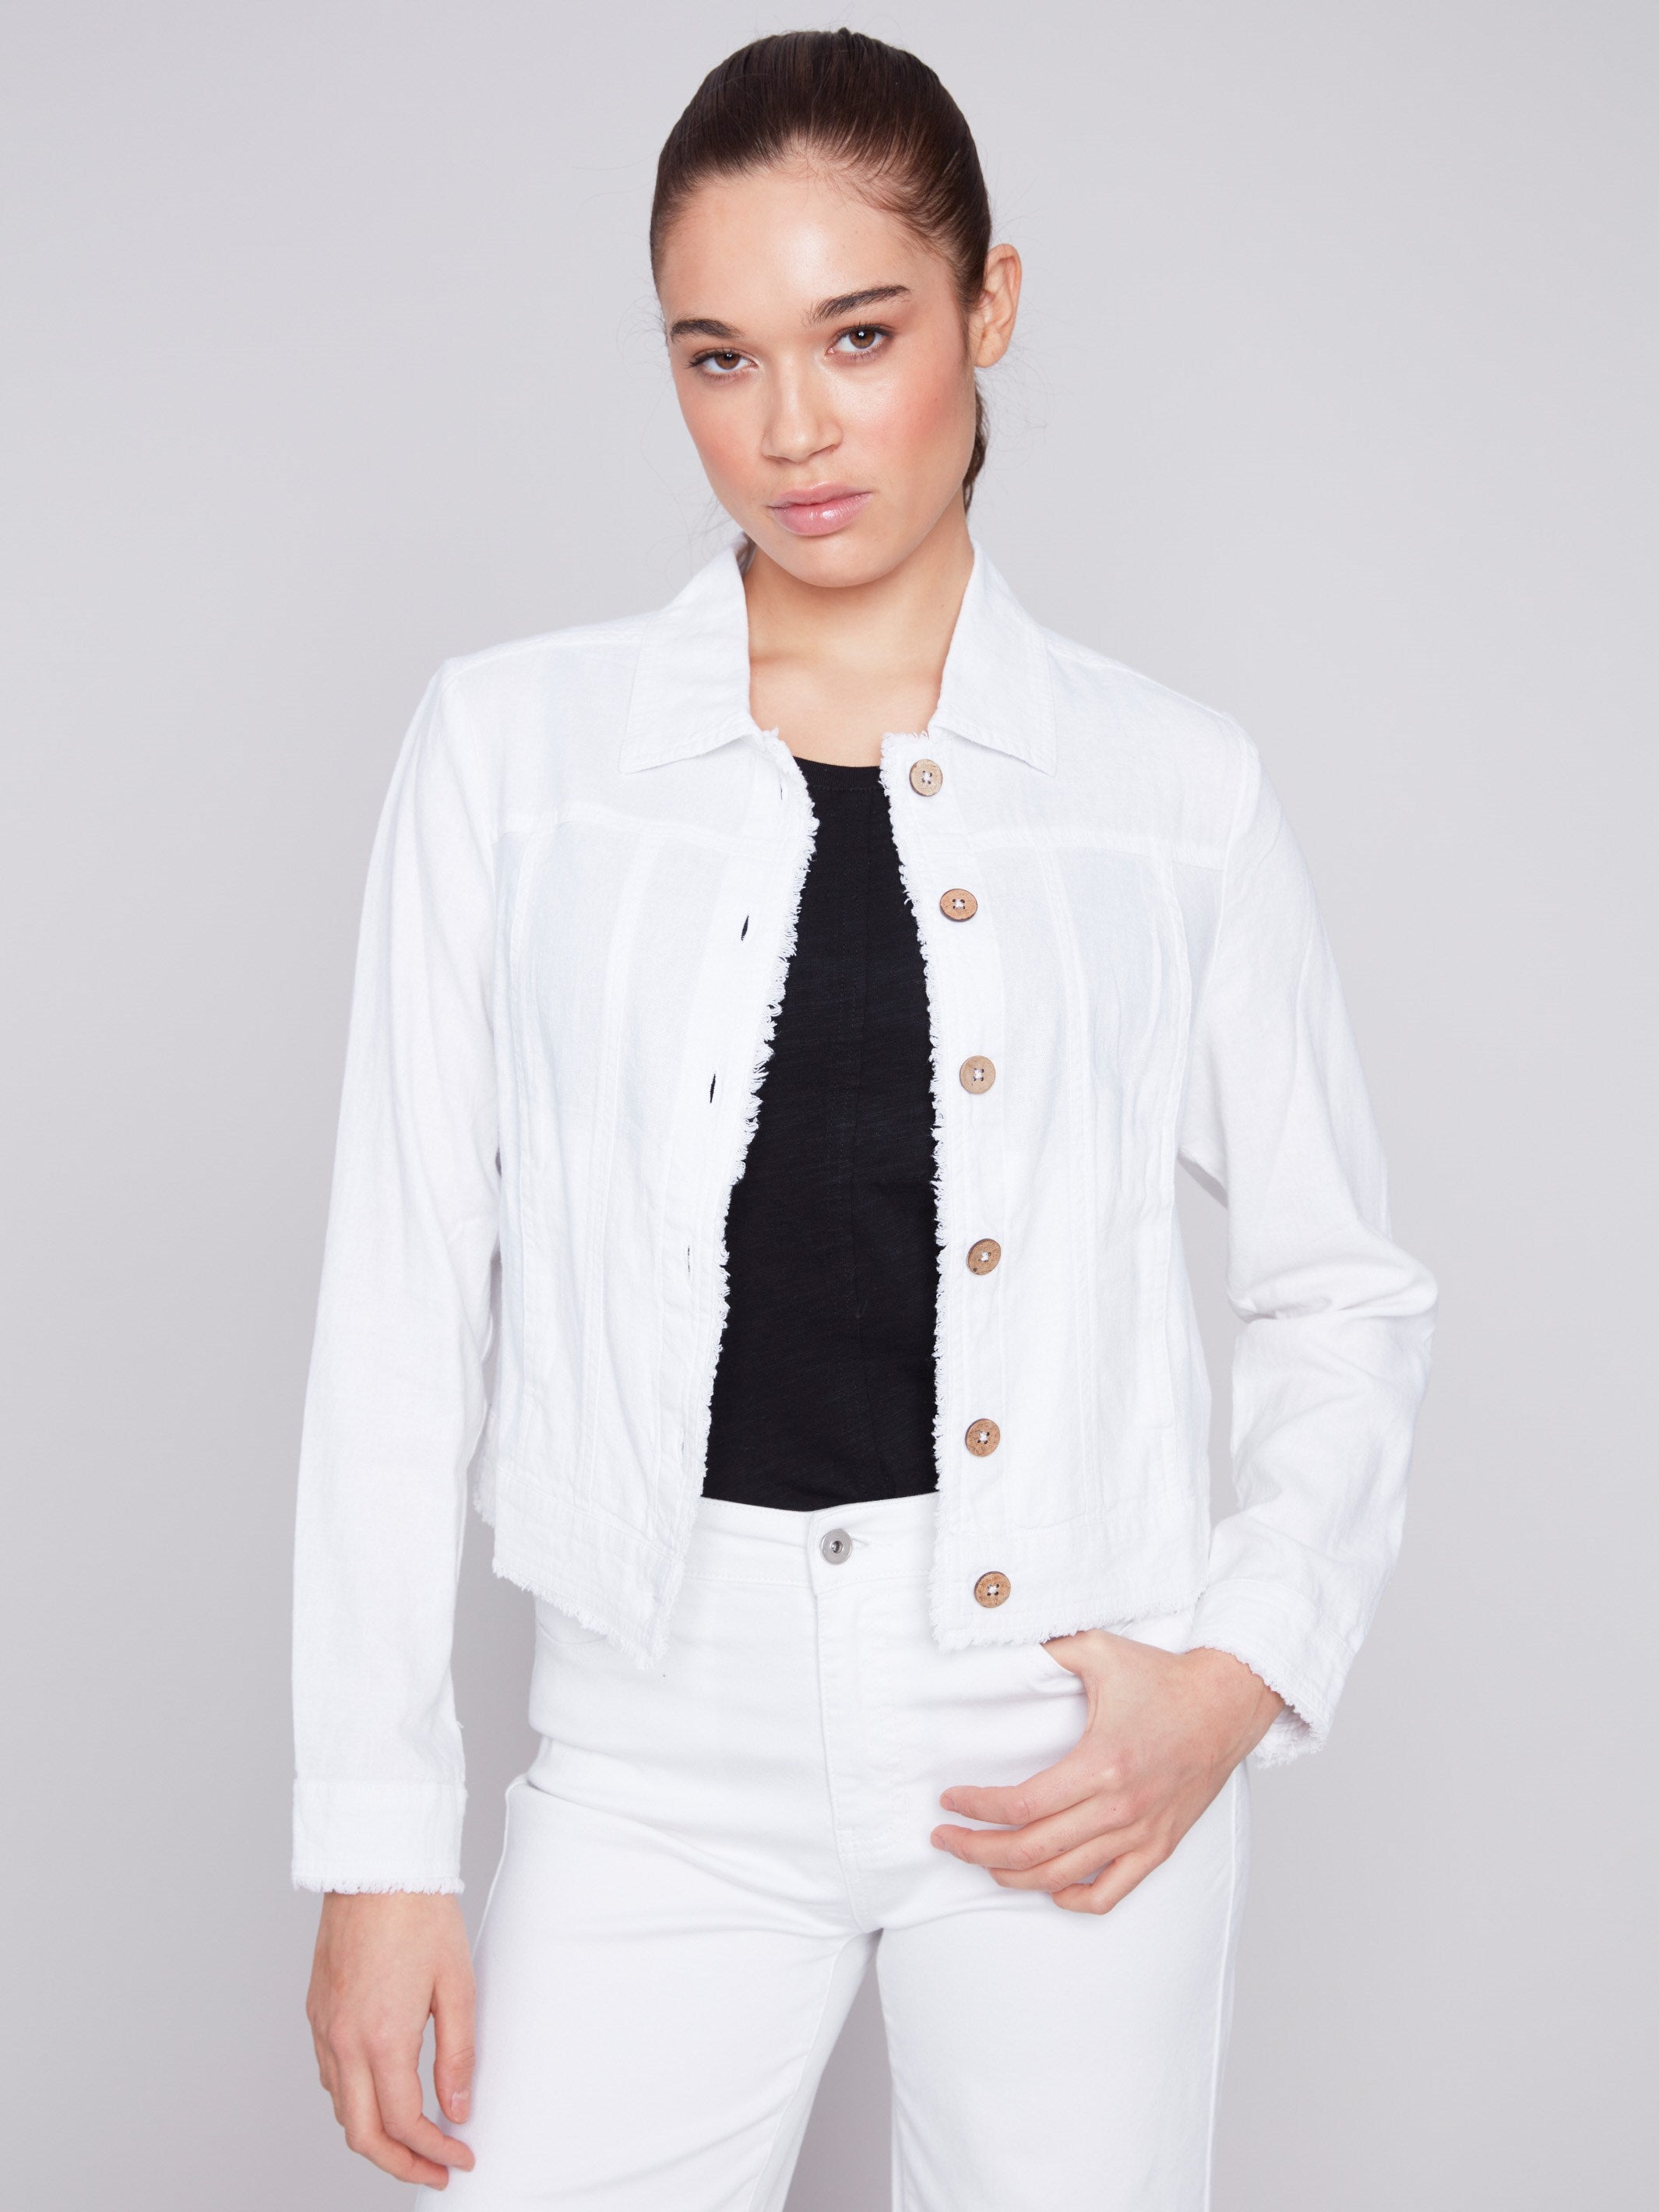 Linen Blend Jacket - White - Charlie B Collection Canada - Image 1